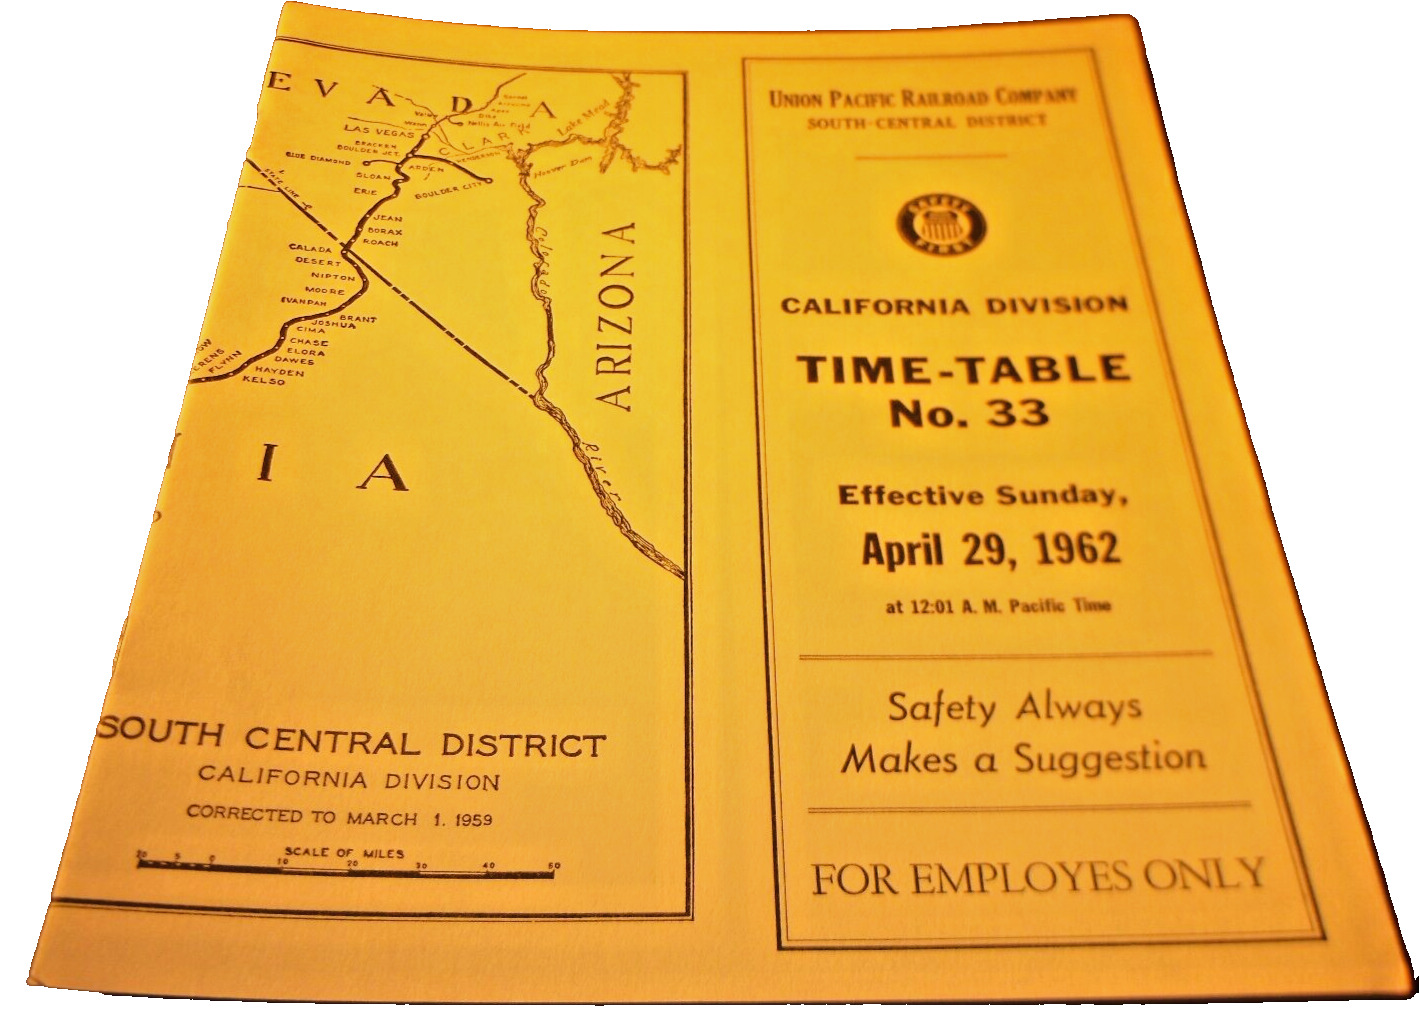 APRIL 1962 UNION PACIFIC CALIFORNIA DIVISION EMPLOYEE TIMETABLE #33